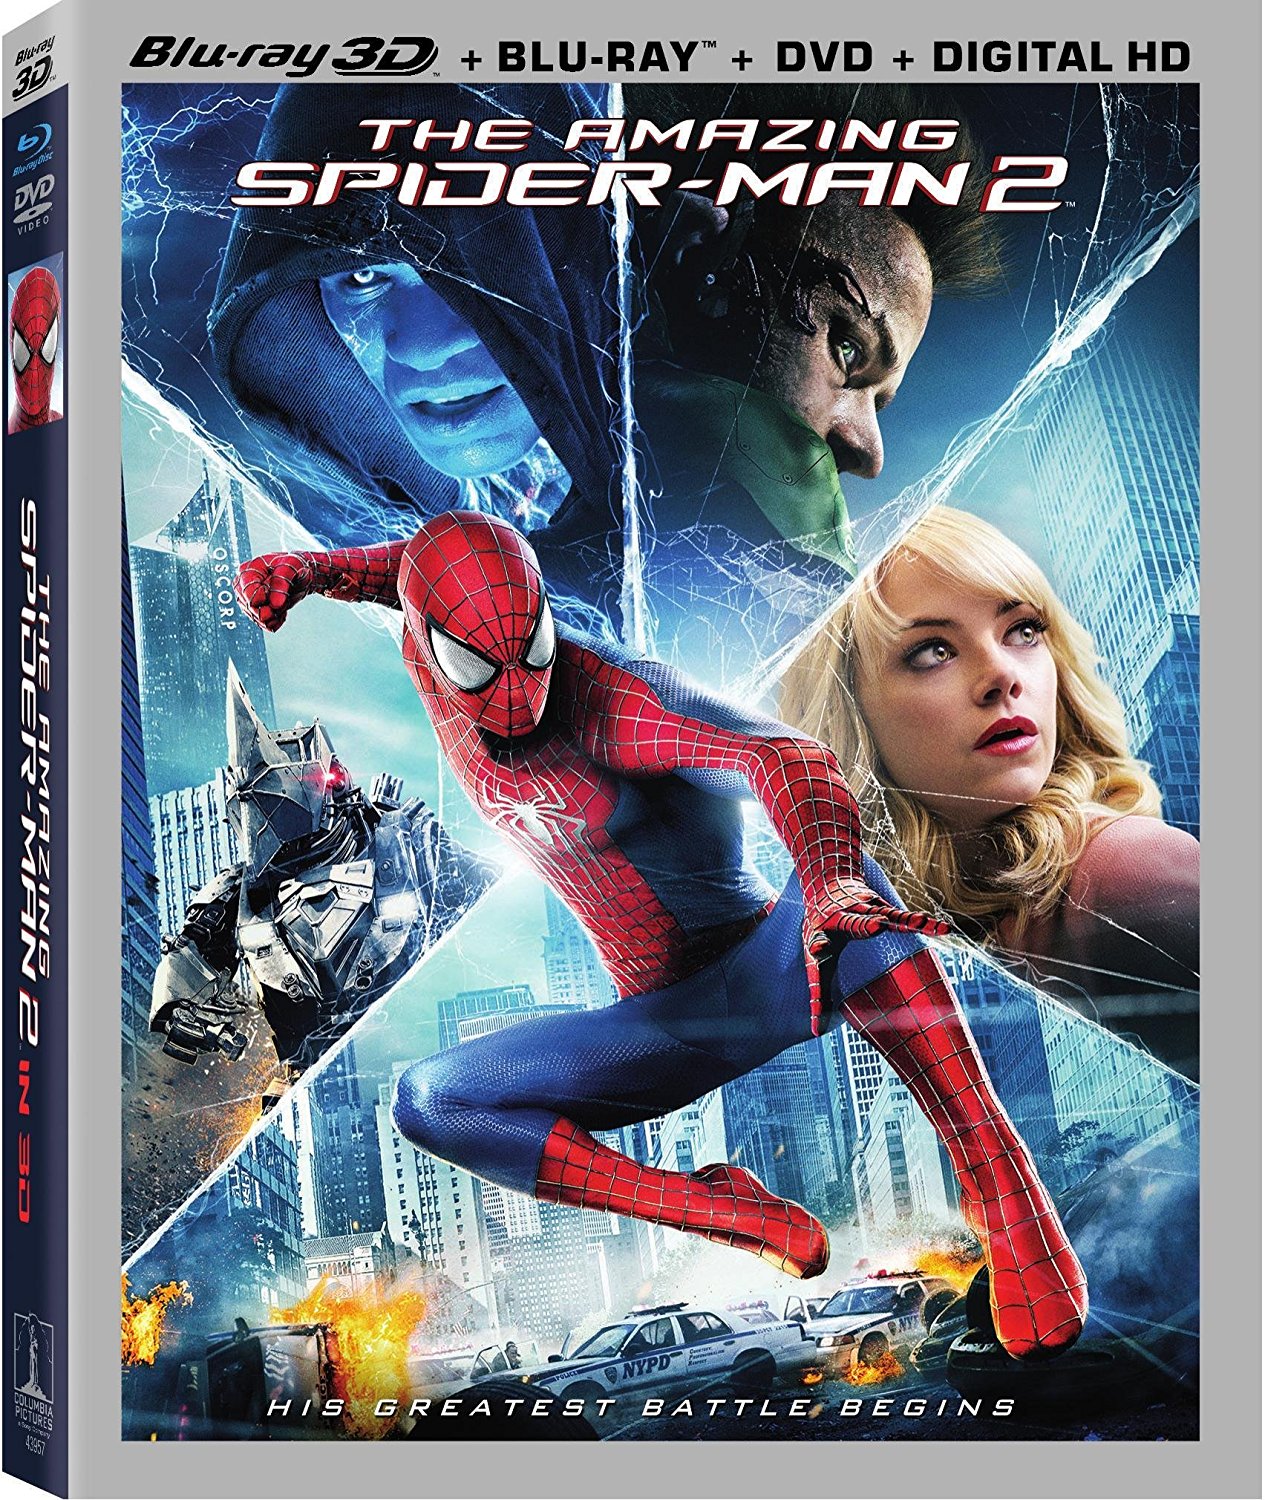 The Amazing Spider-Man 2 – 3D/Blu-Ray/DVD/UltraViolet Combo Pack – Just $9.99!